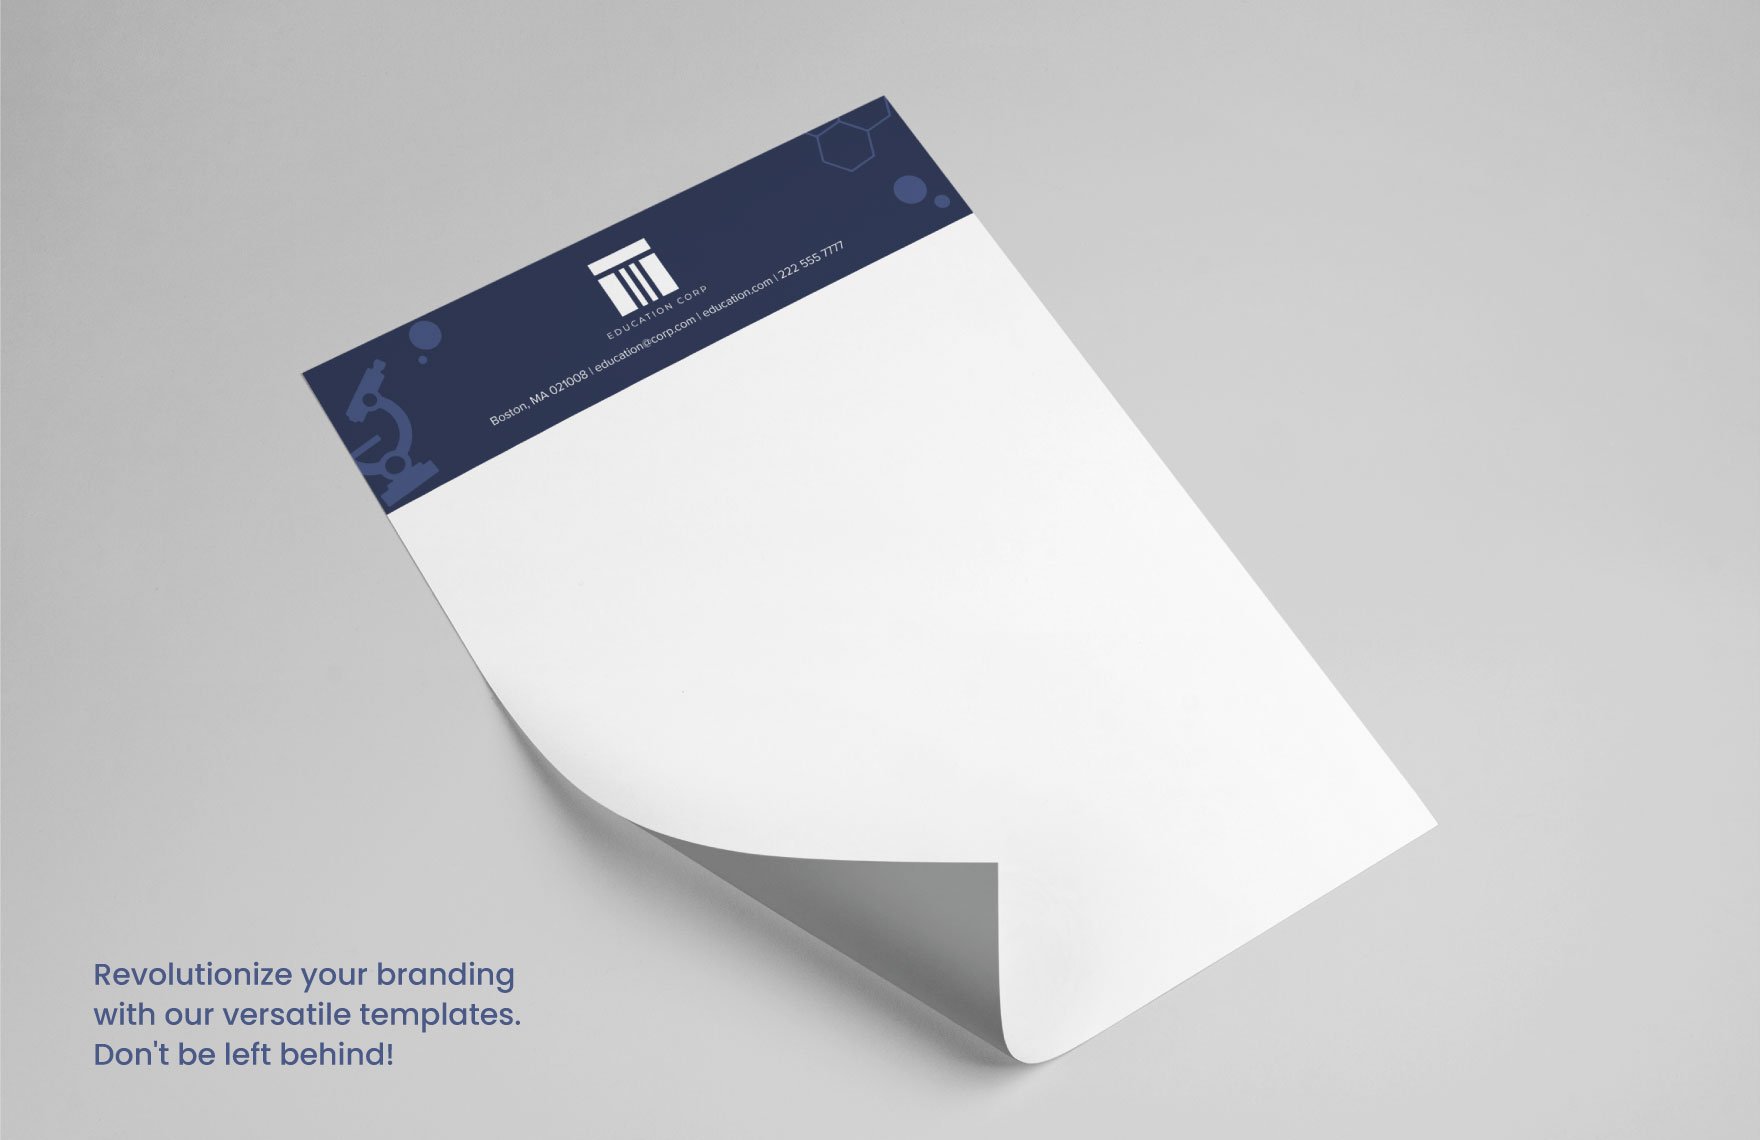 Science and Technology School Letterhead Template